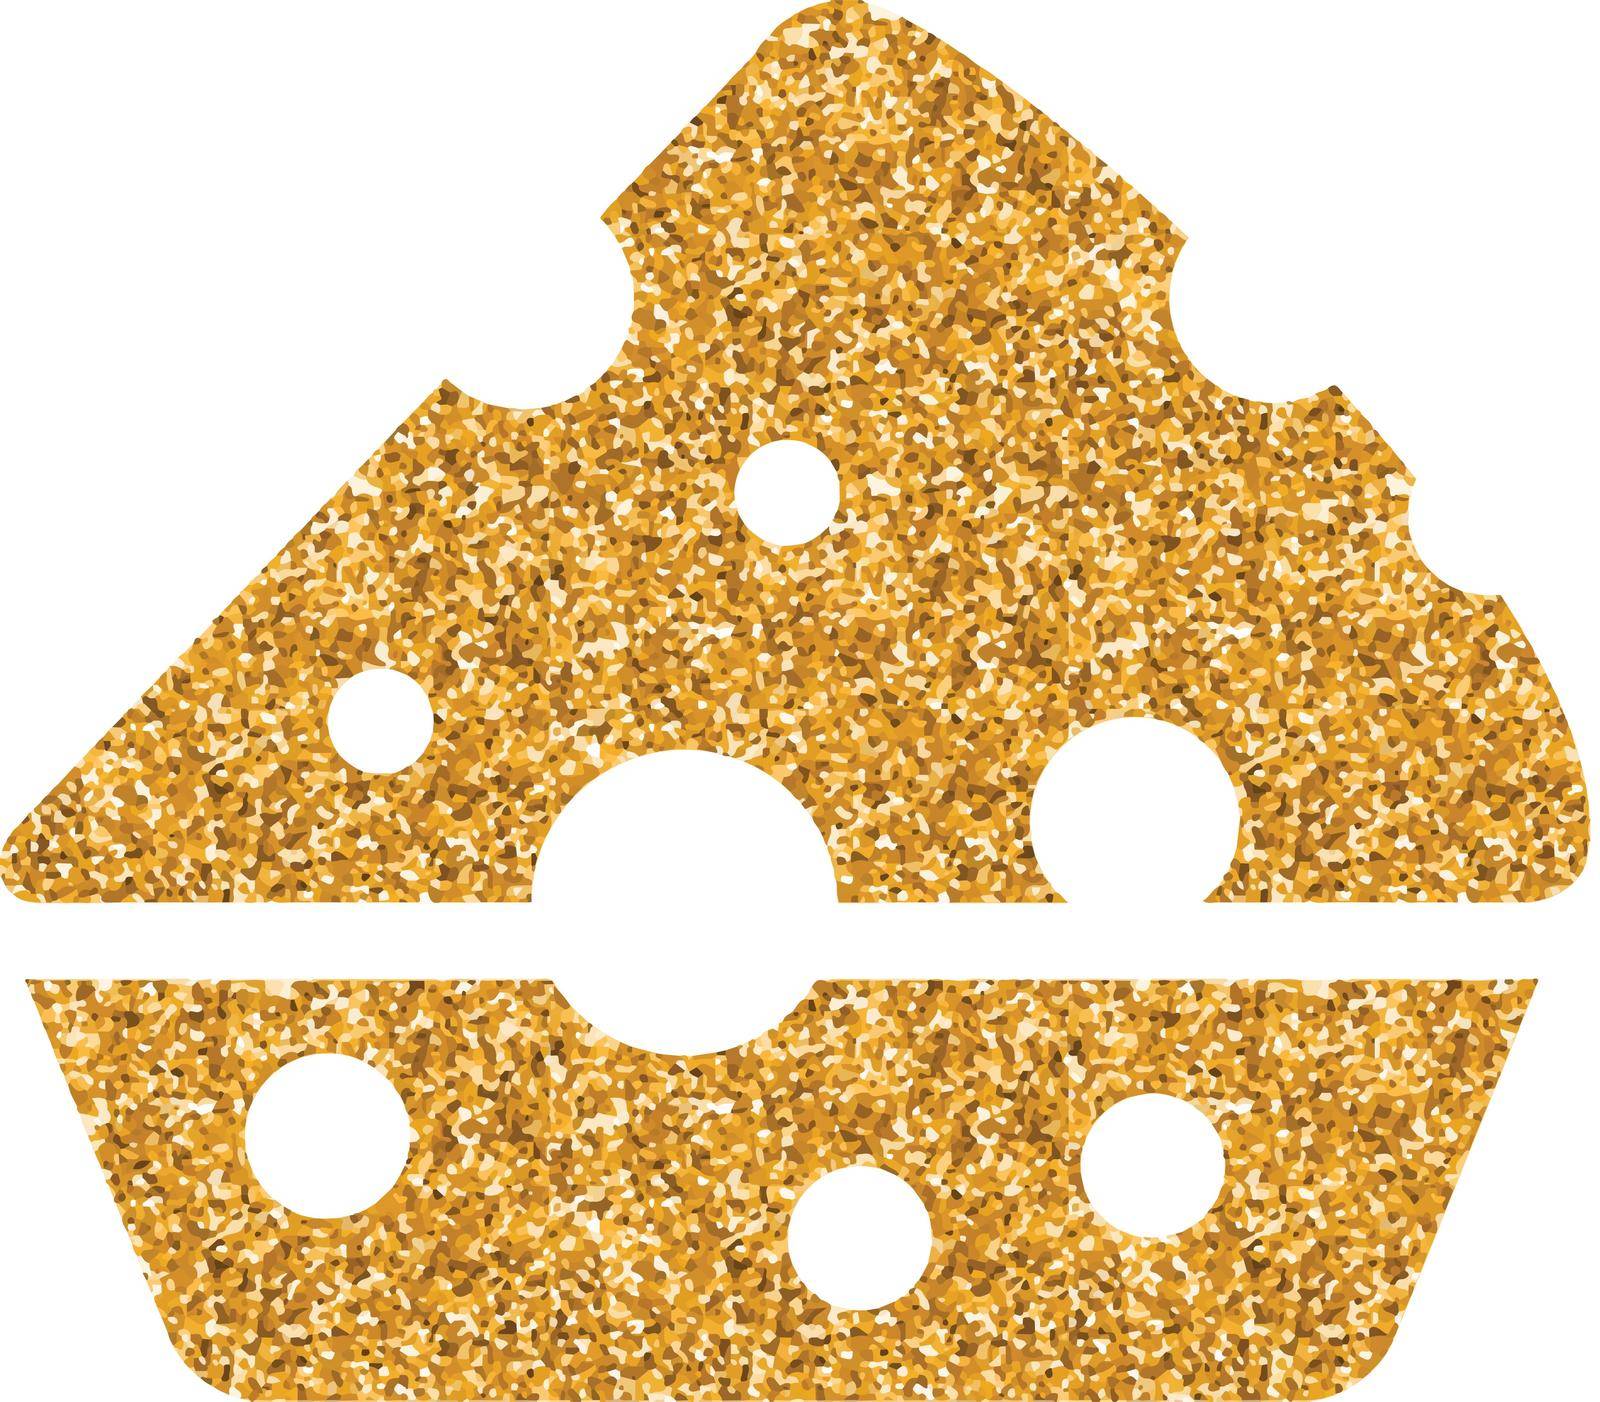 Cheese icon in gold glitter texture. Sparkle luxury style vector illustration.